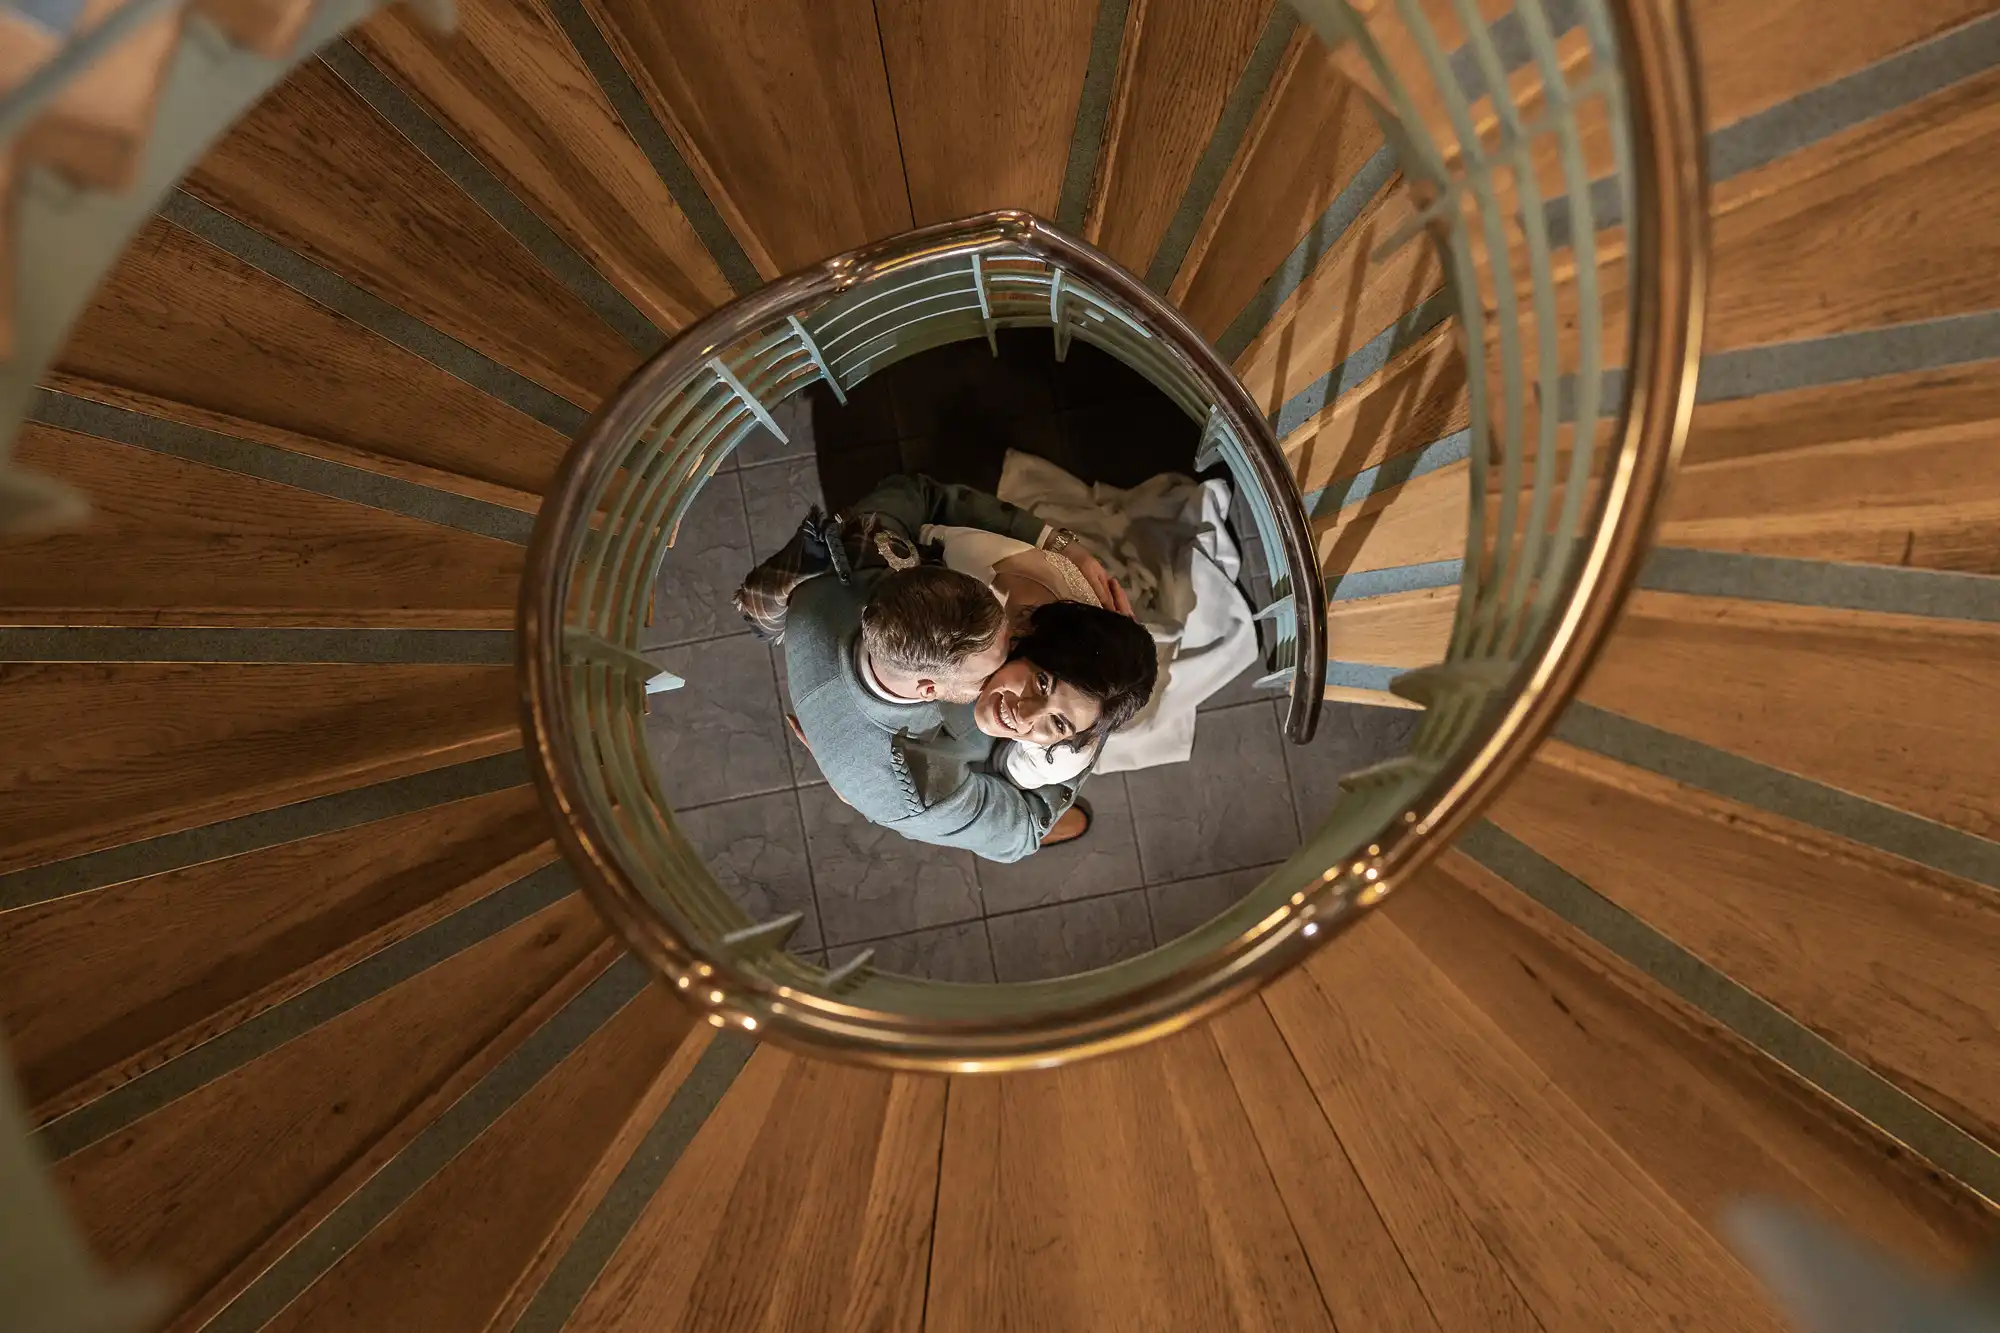 A couple embraces while standing at the bottom of a spiral staircase, viewed from above. The wooden steps and metal railing create a circular frame around them.